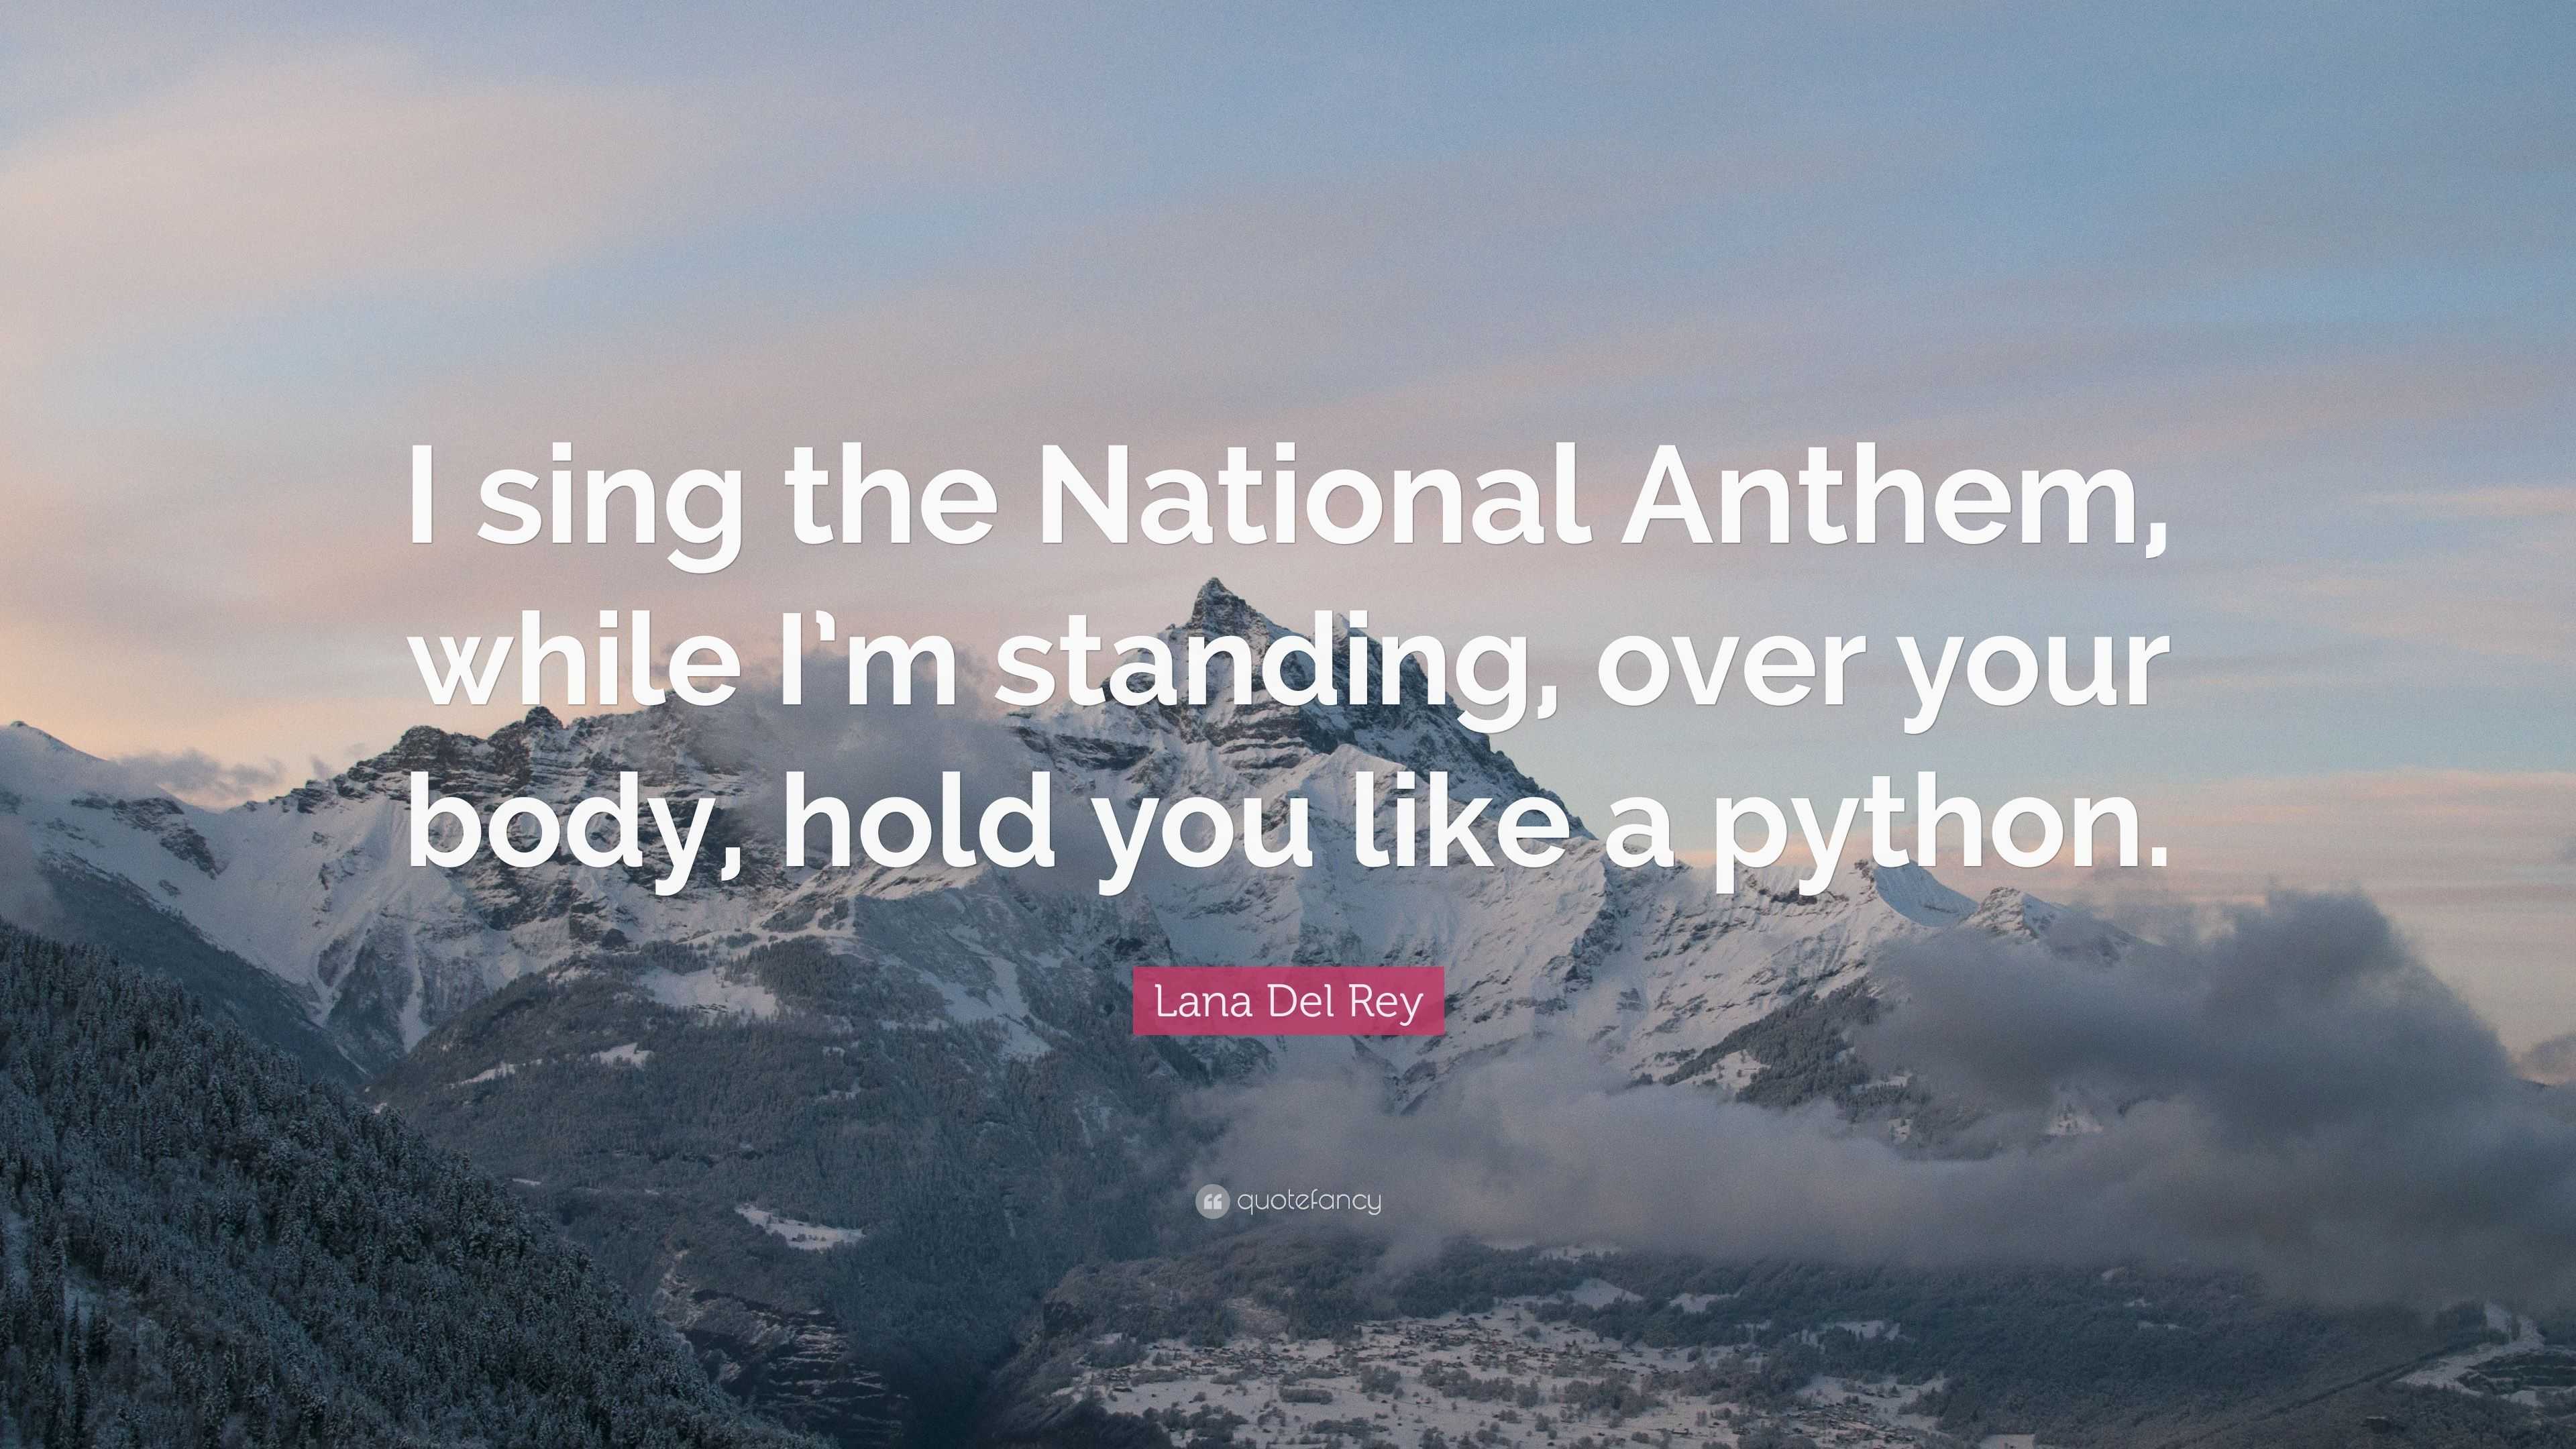 Lana Del Rey Quote: “I sing the National Anthem, while I’m ...